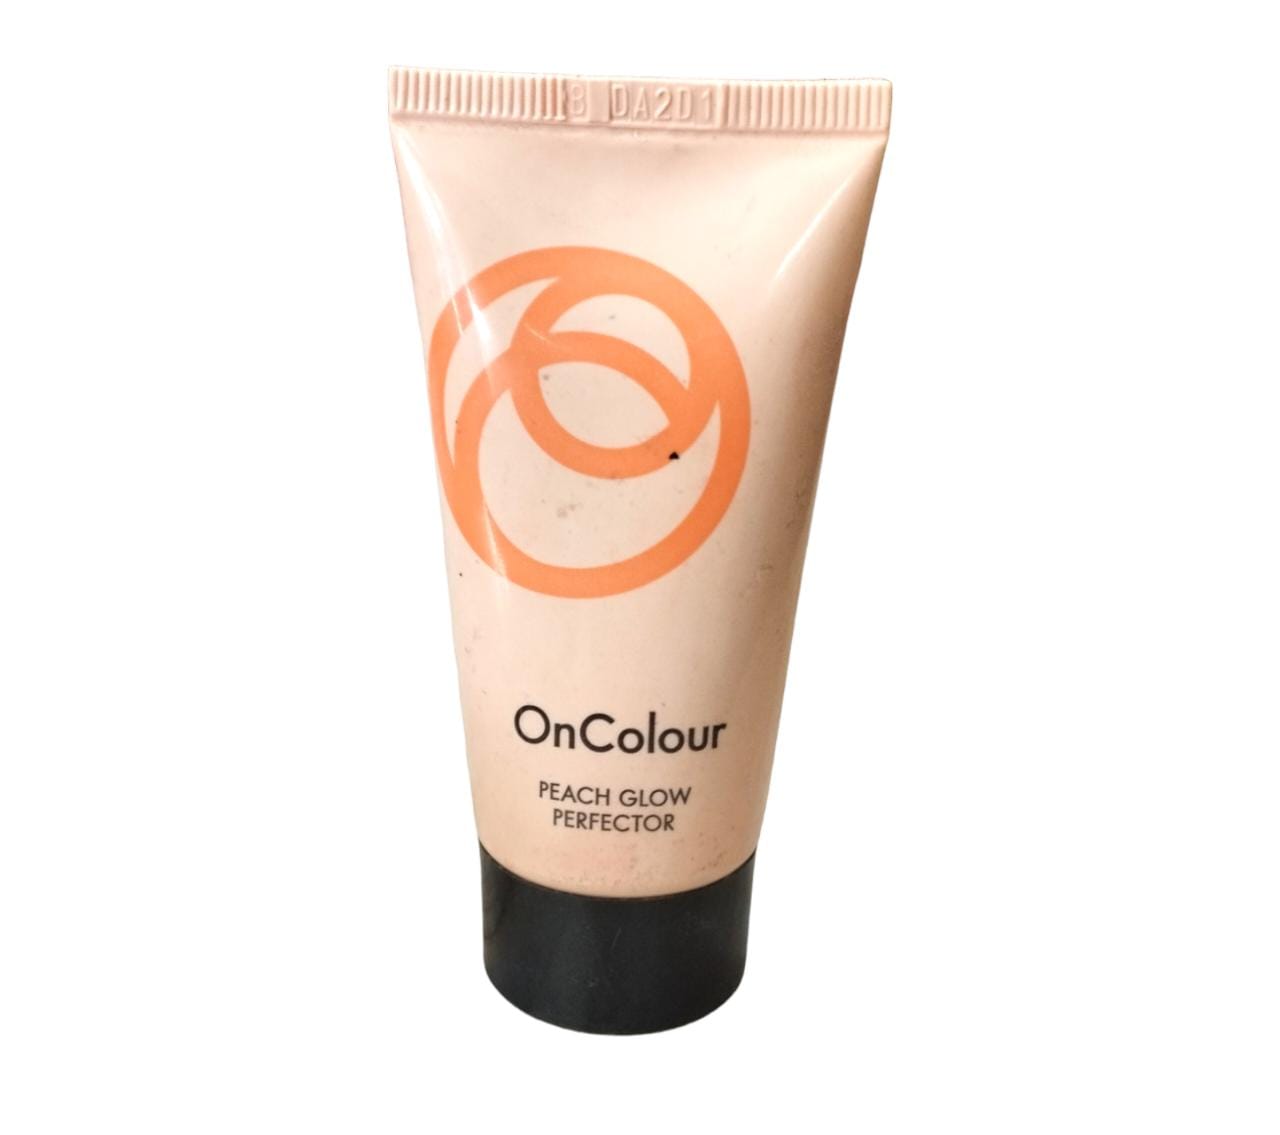 on color Peach glow perfector